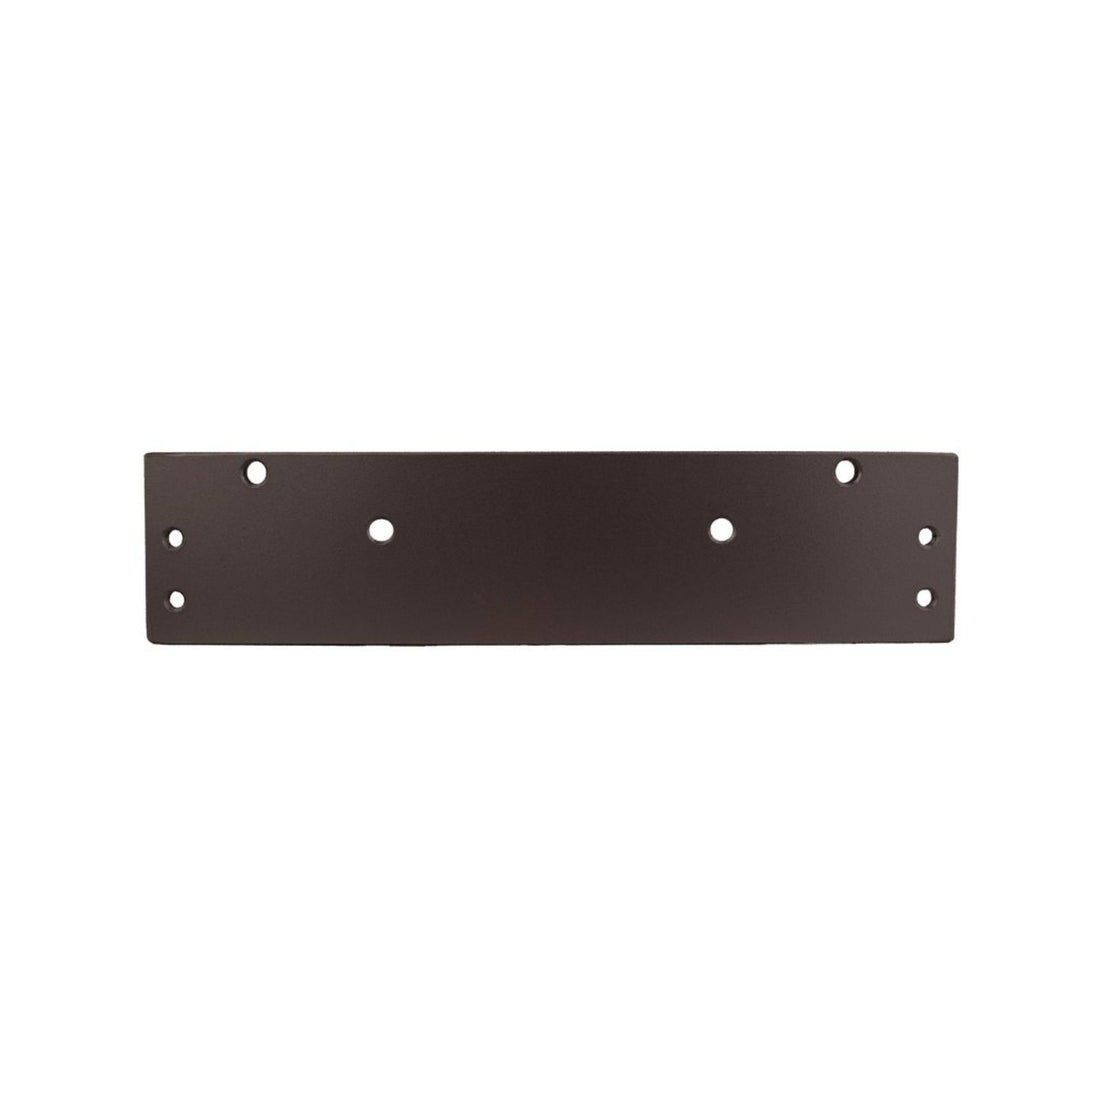 Top Jamb Mount Drop Plate for 4300 Series -  Pro-Edge HD